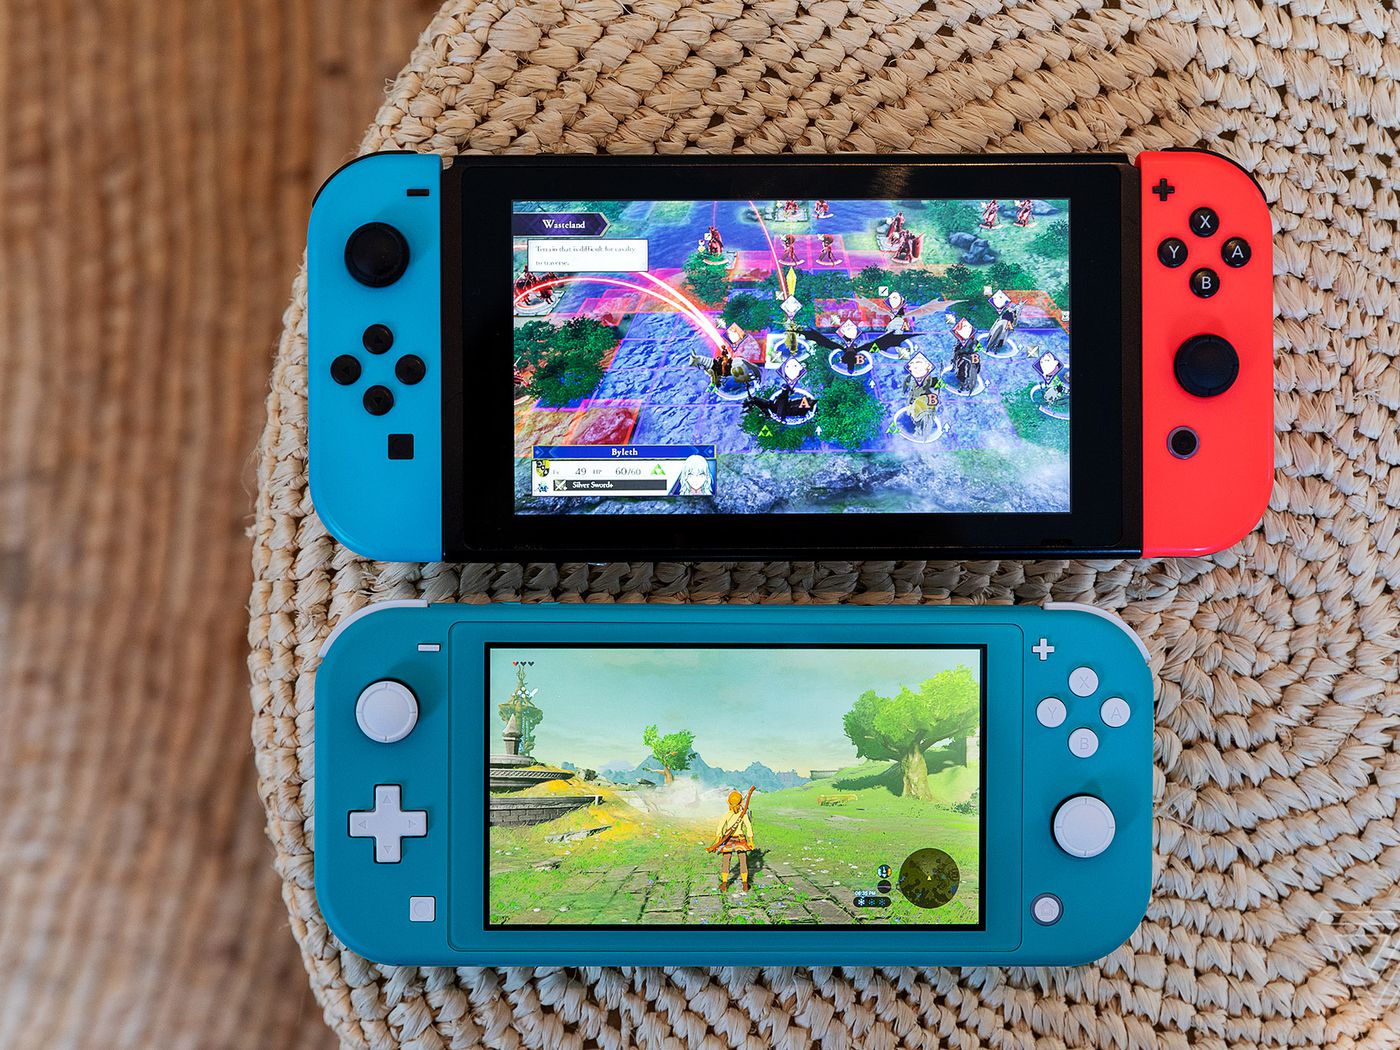 The 8 best games for your new Nintendo Switch - The Verge